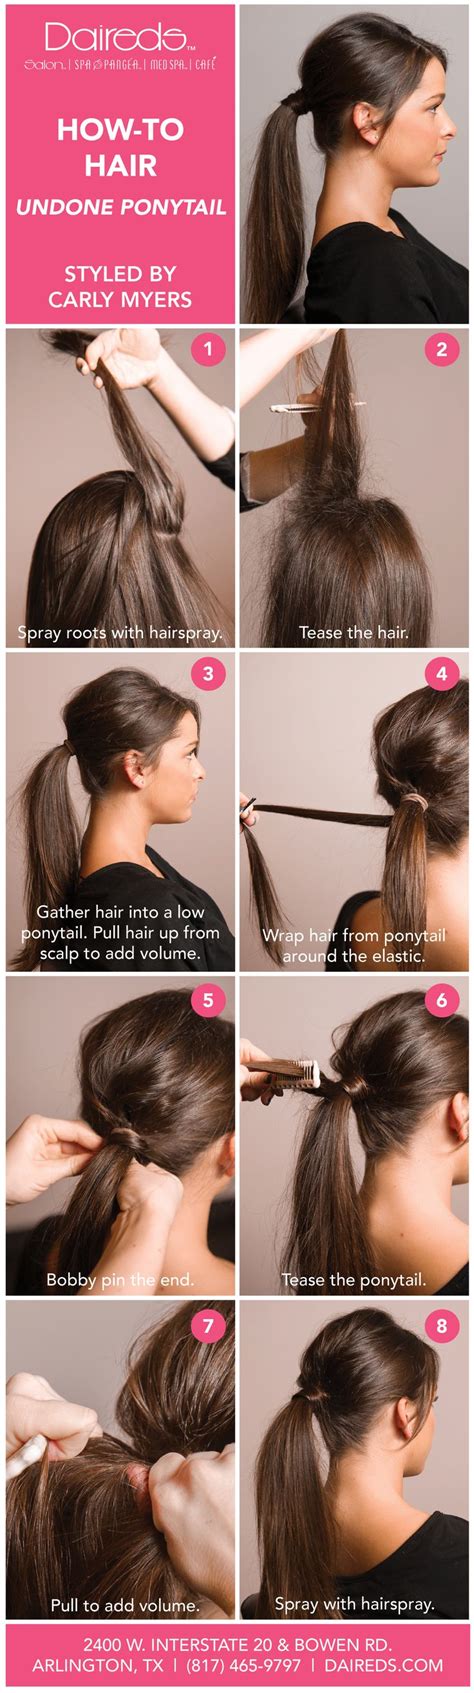 A Perfectly Messy Ponytail Is Only Steps Away Our Guide To An Undone